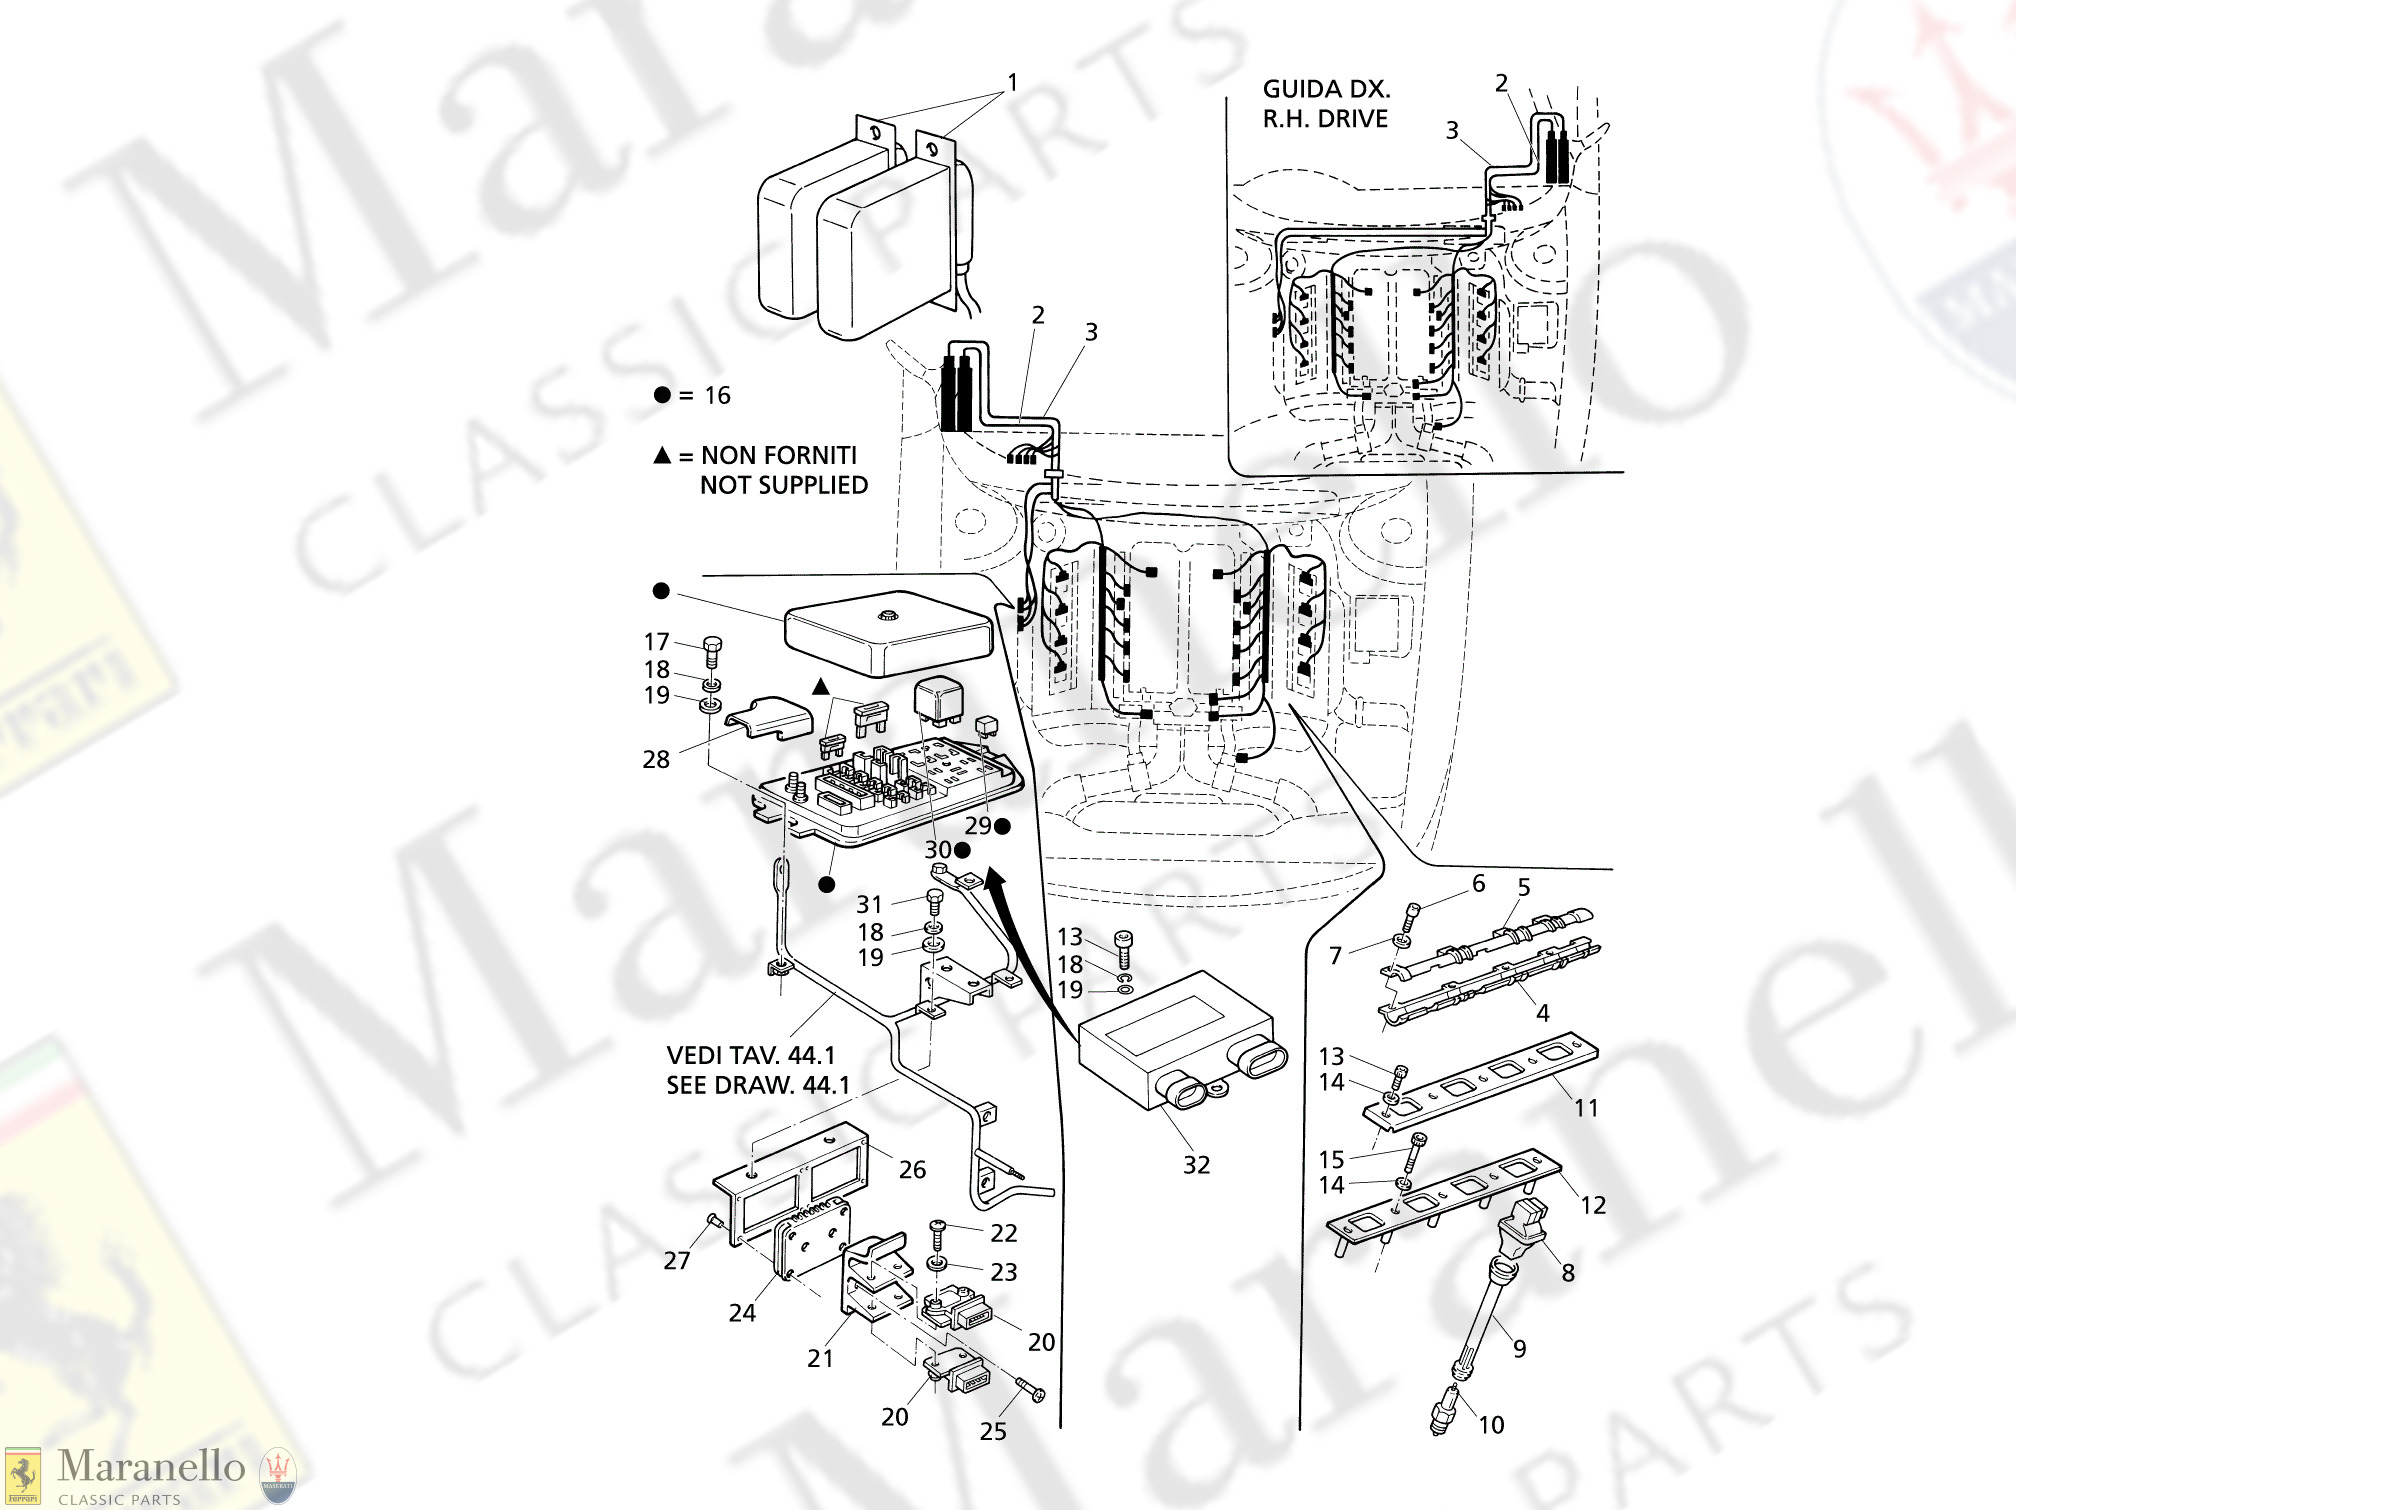 C 16 - Ignition System